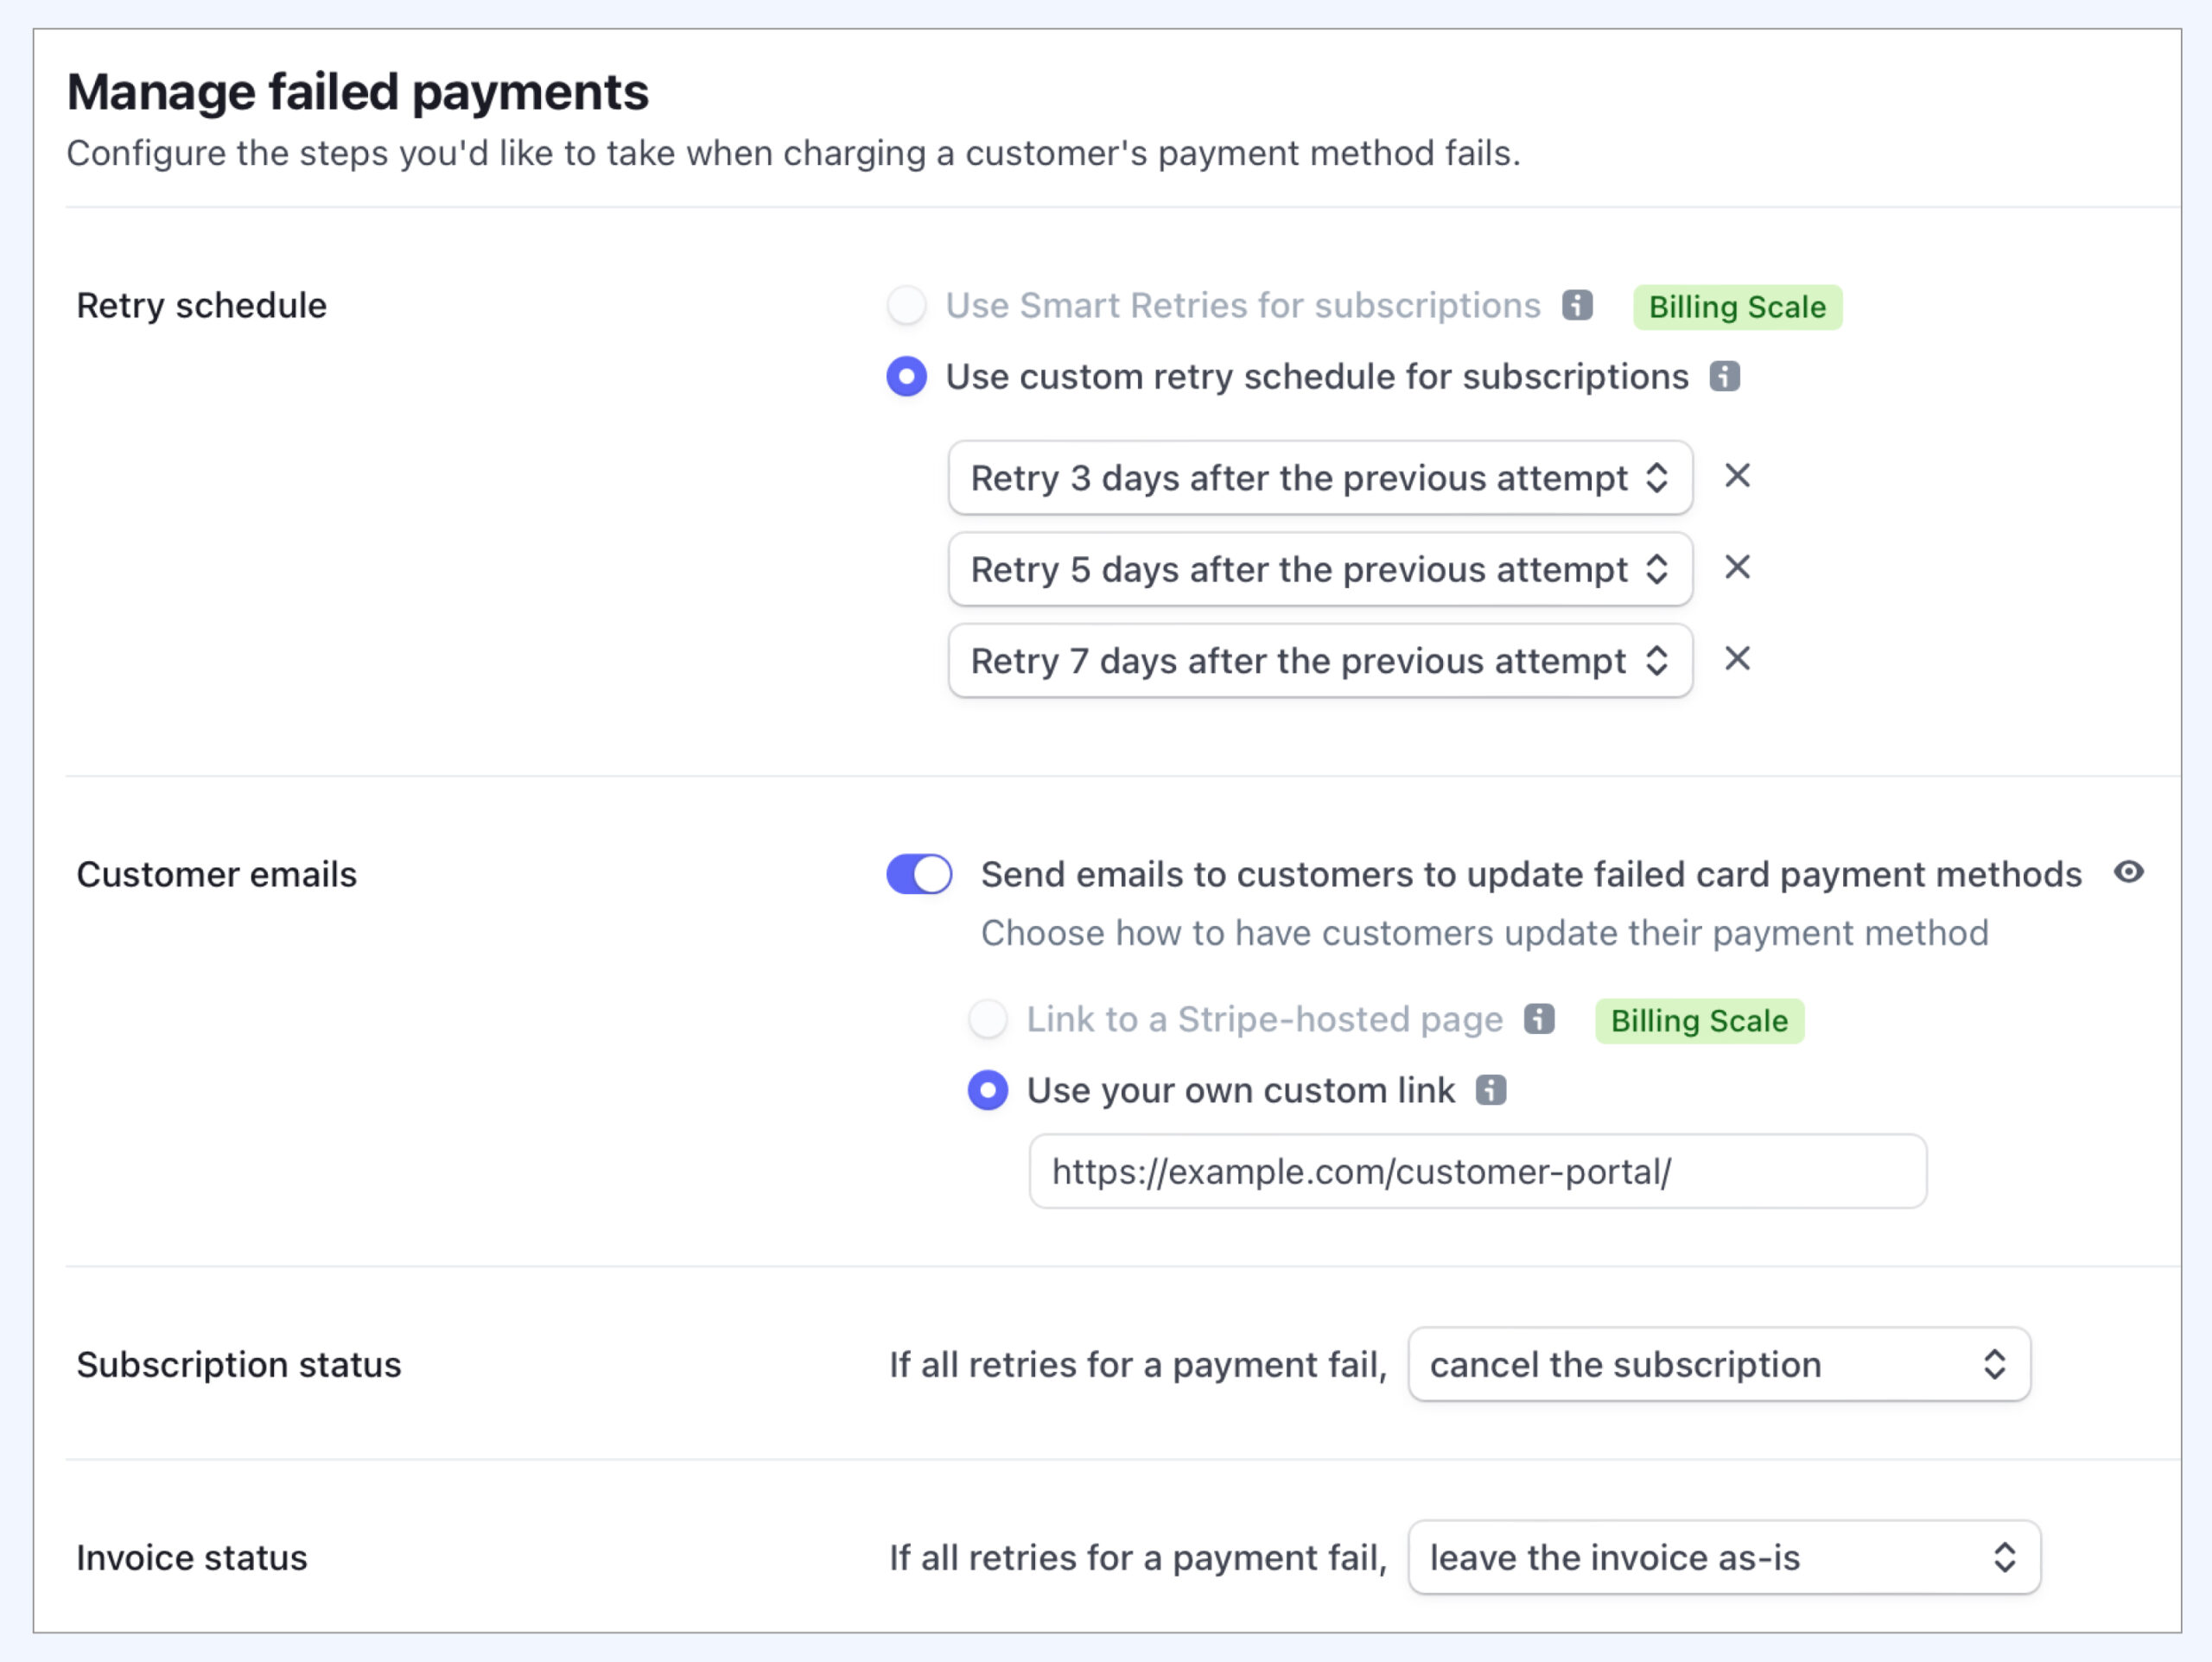 Stripe lets you customize your failed payment email as part of your dunning process.